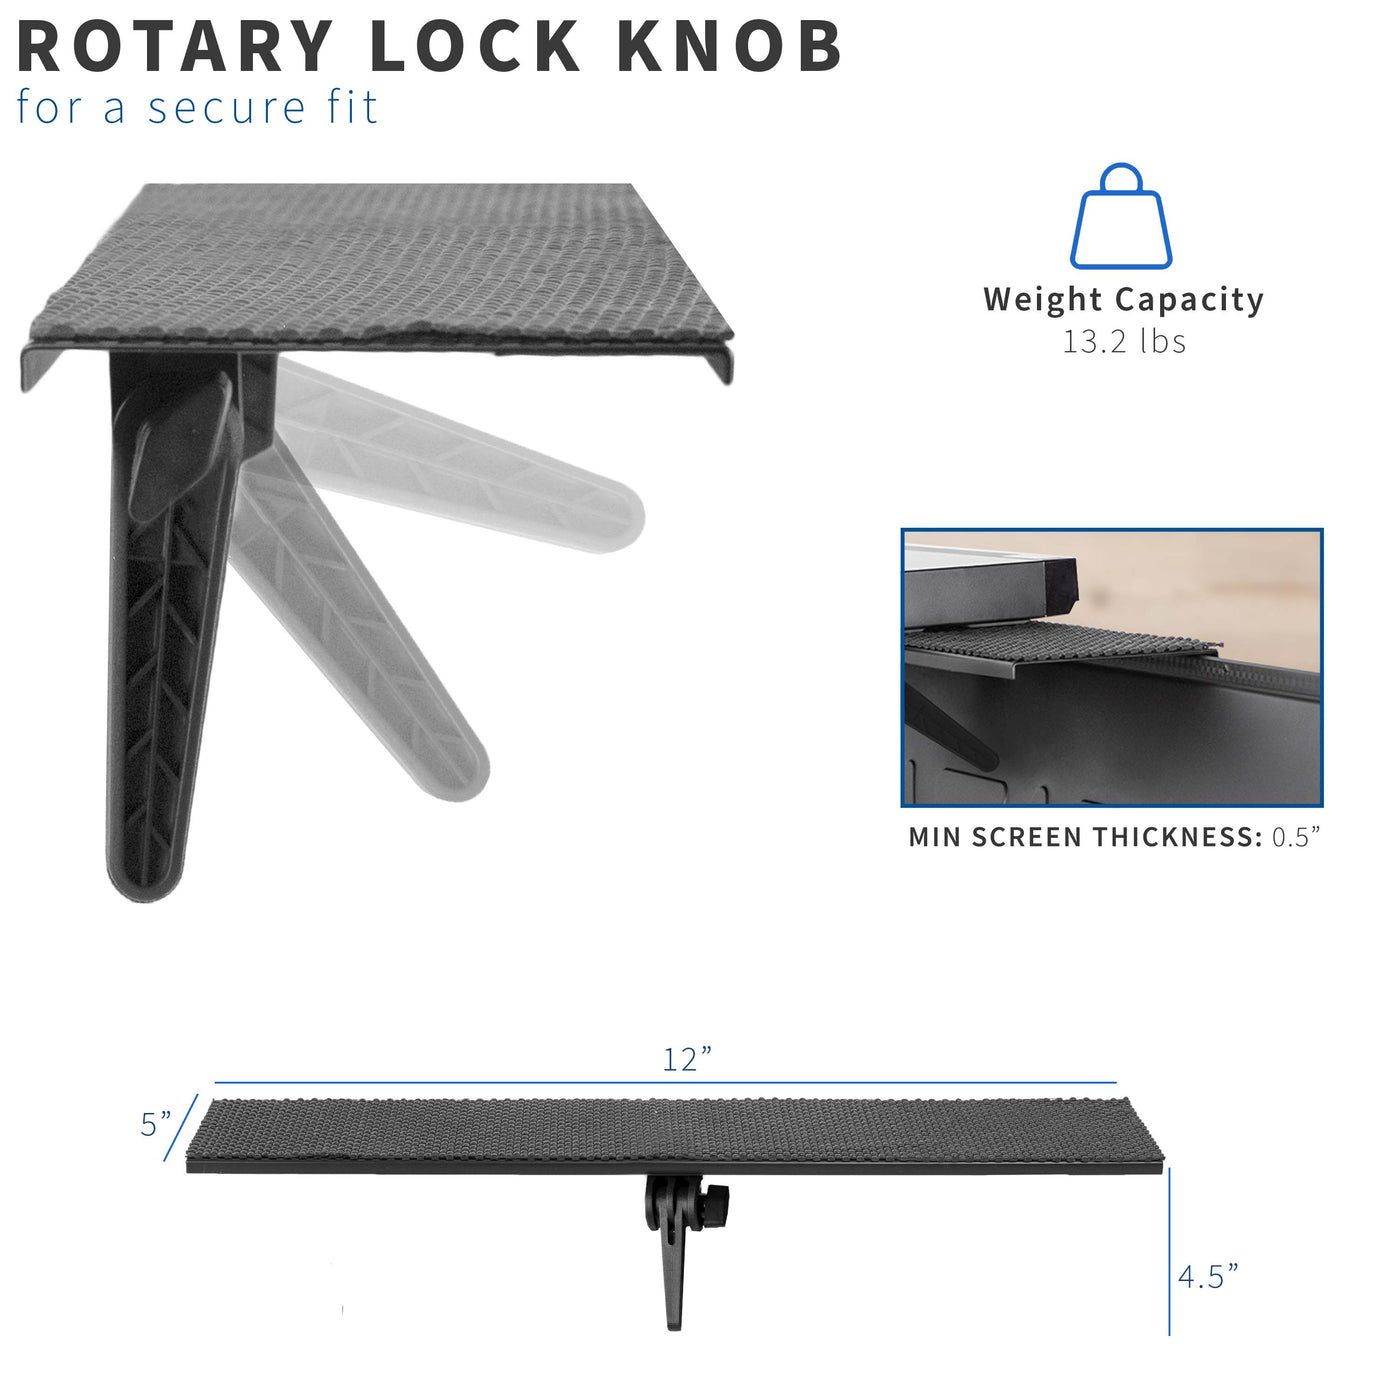 Rotary lock knob can lock in different angles for the most secure support.